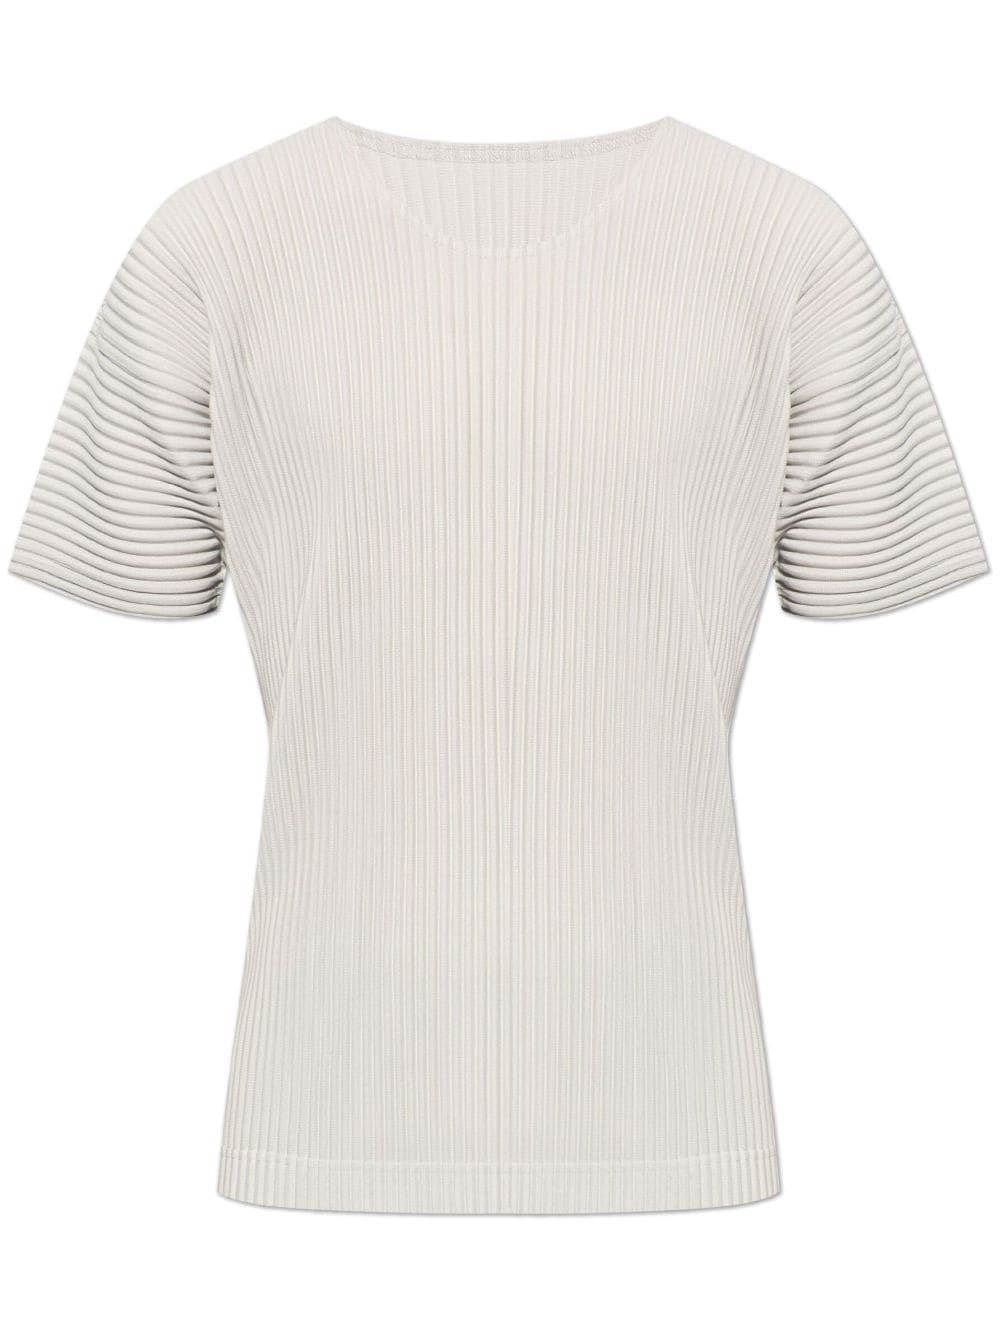  HOMME PLISSE' ISSEY MIYAKE- Pleated T-shirt